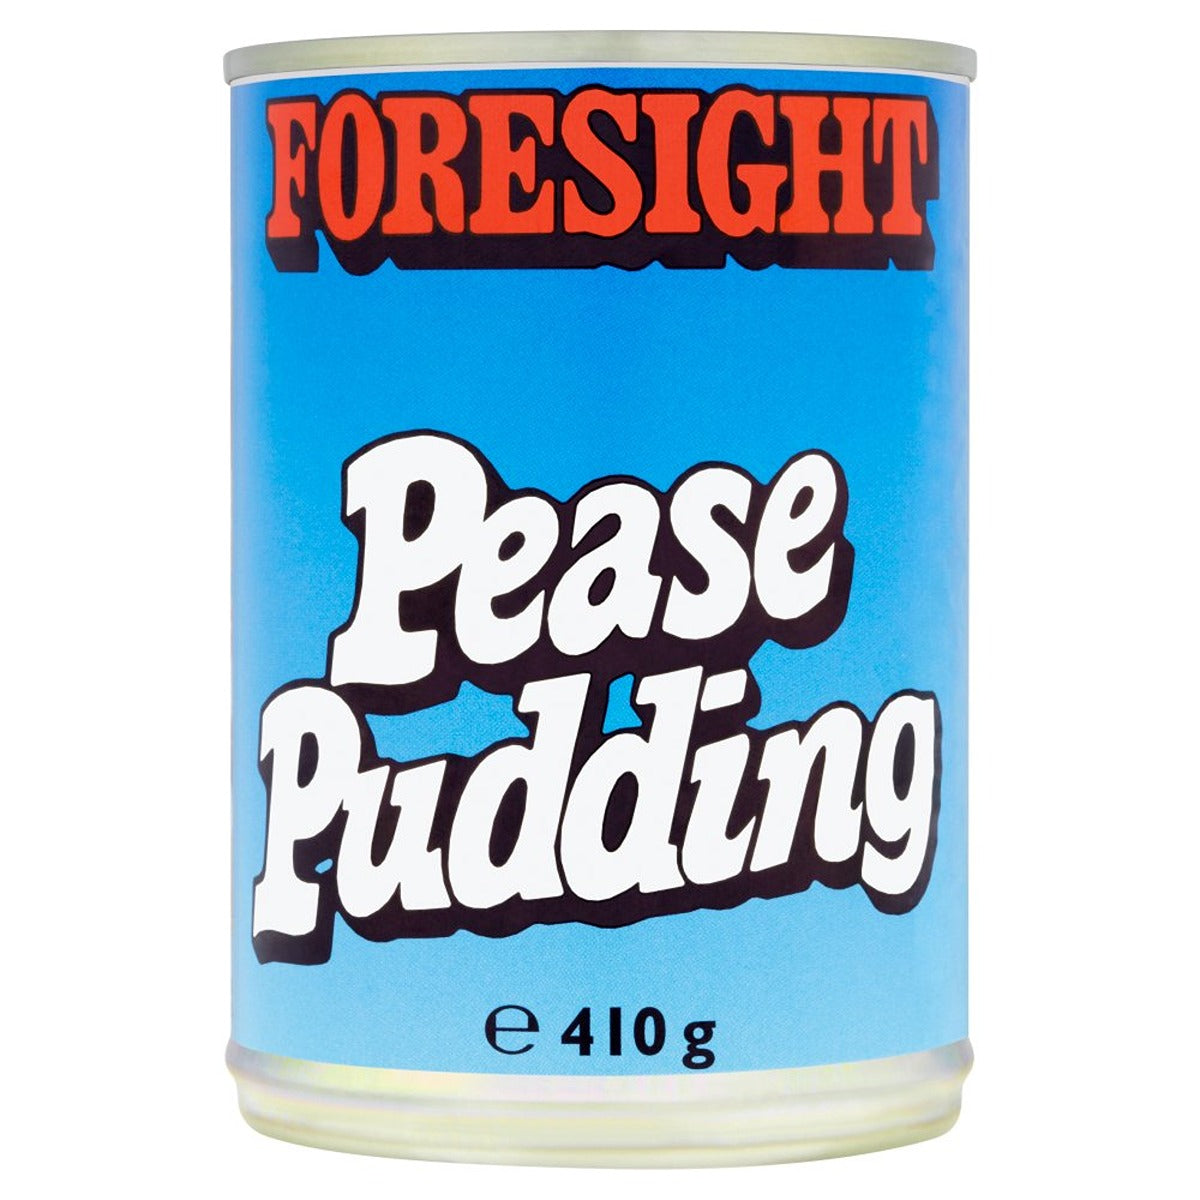 Foresight - Pease Pudding - 410g by Foresight.